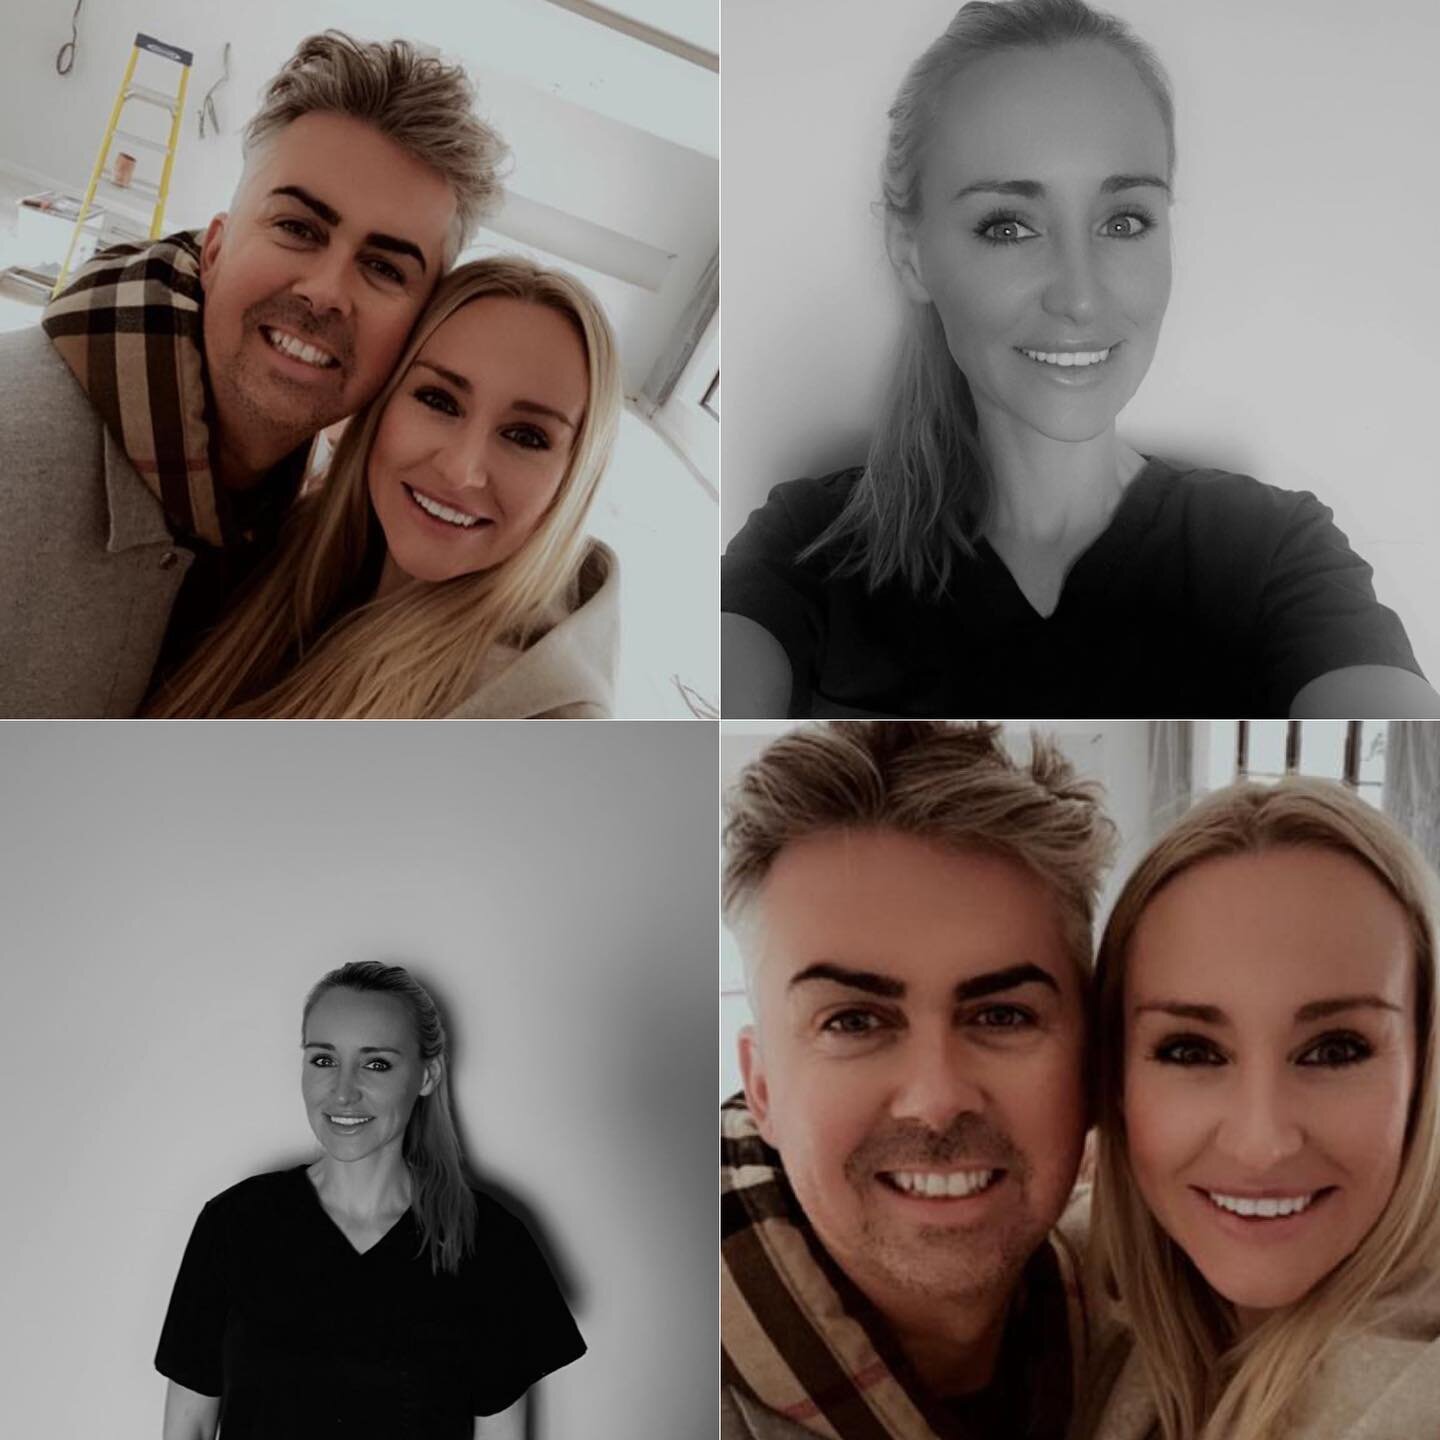 Guys &hellip;. Meet Hannah!❤️
⠀⠀⠀⠀⠀⠀⠀⠀⠀
Hannah is going to be joining me at the NEW salon offering our first wellness service &hellip; PODIATRY 🤍
⠀⠀⠀⠀⠀⠀⠀⠀⠀
She is unbelievable at her job so much that I had to have her on the team to help you lovely 